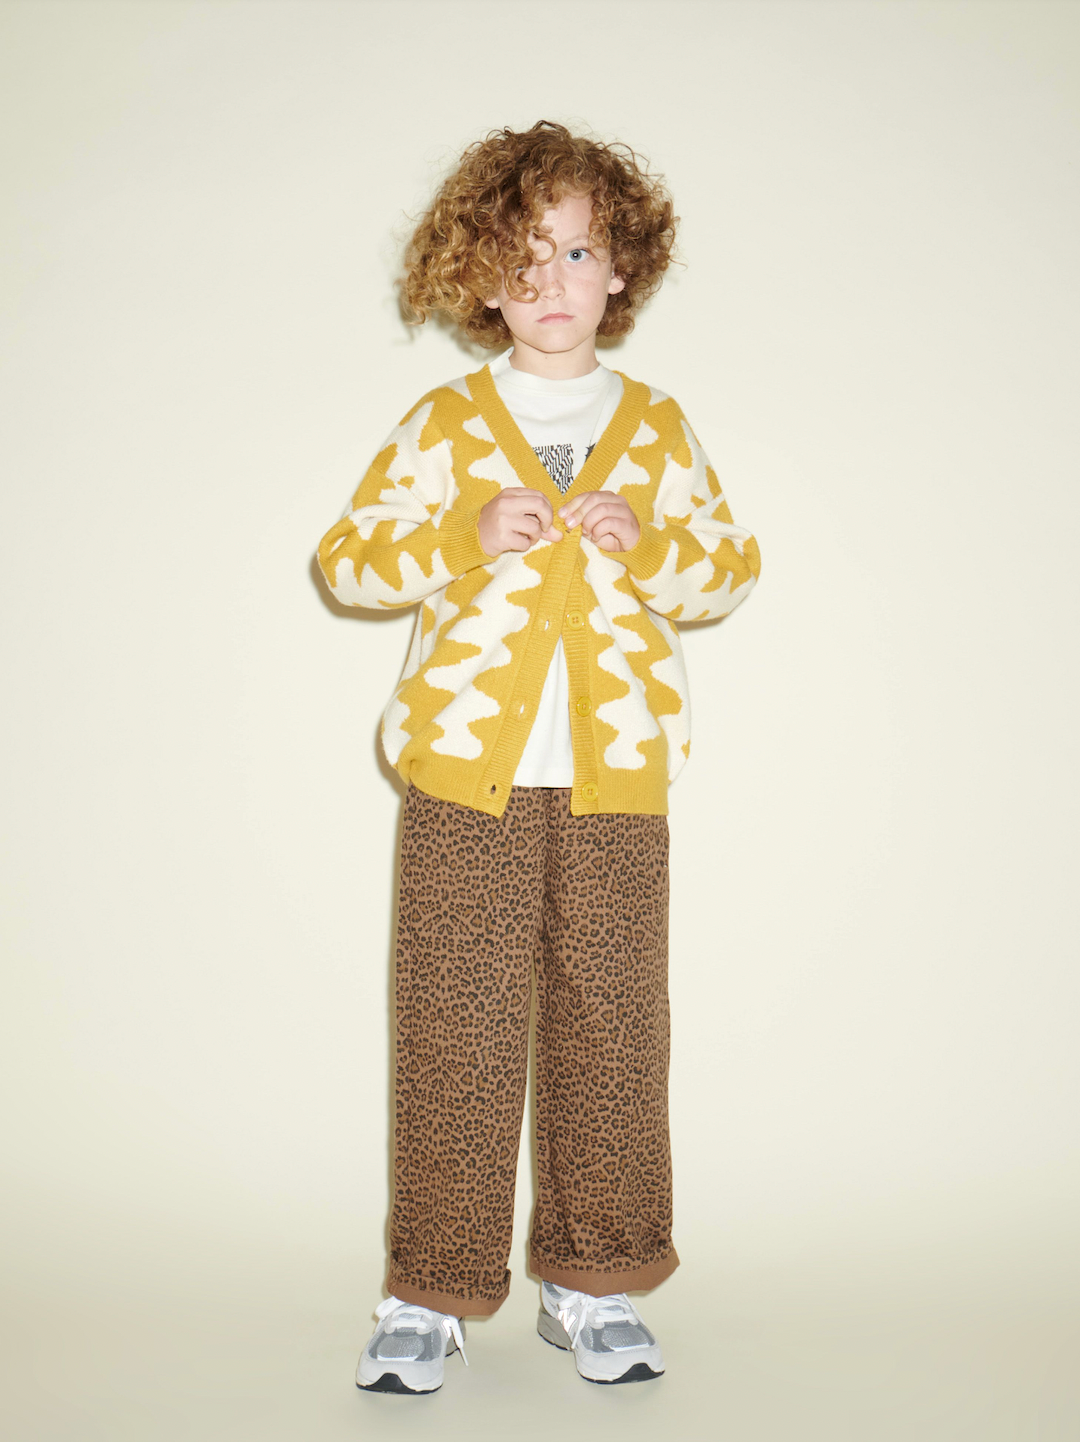 A child wearing Marigold Wavelength Cardigan, with cheetah pants & sneakers, buttoning the sweater.